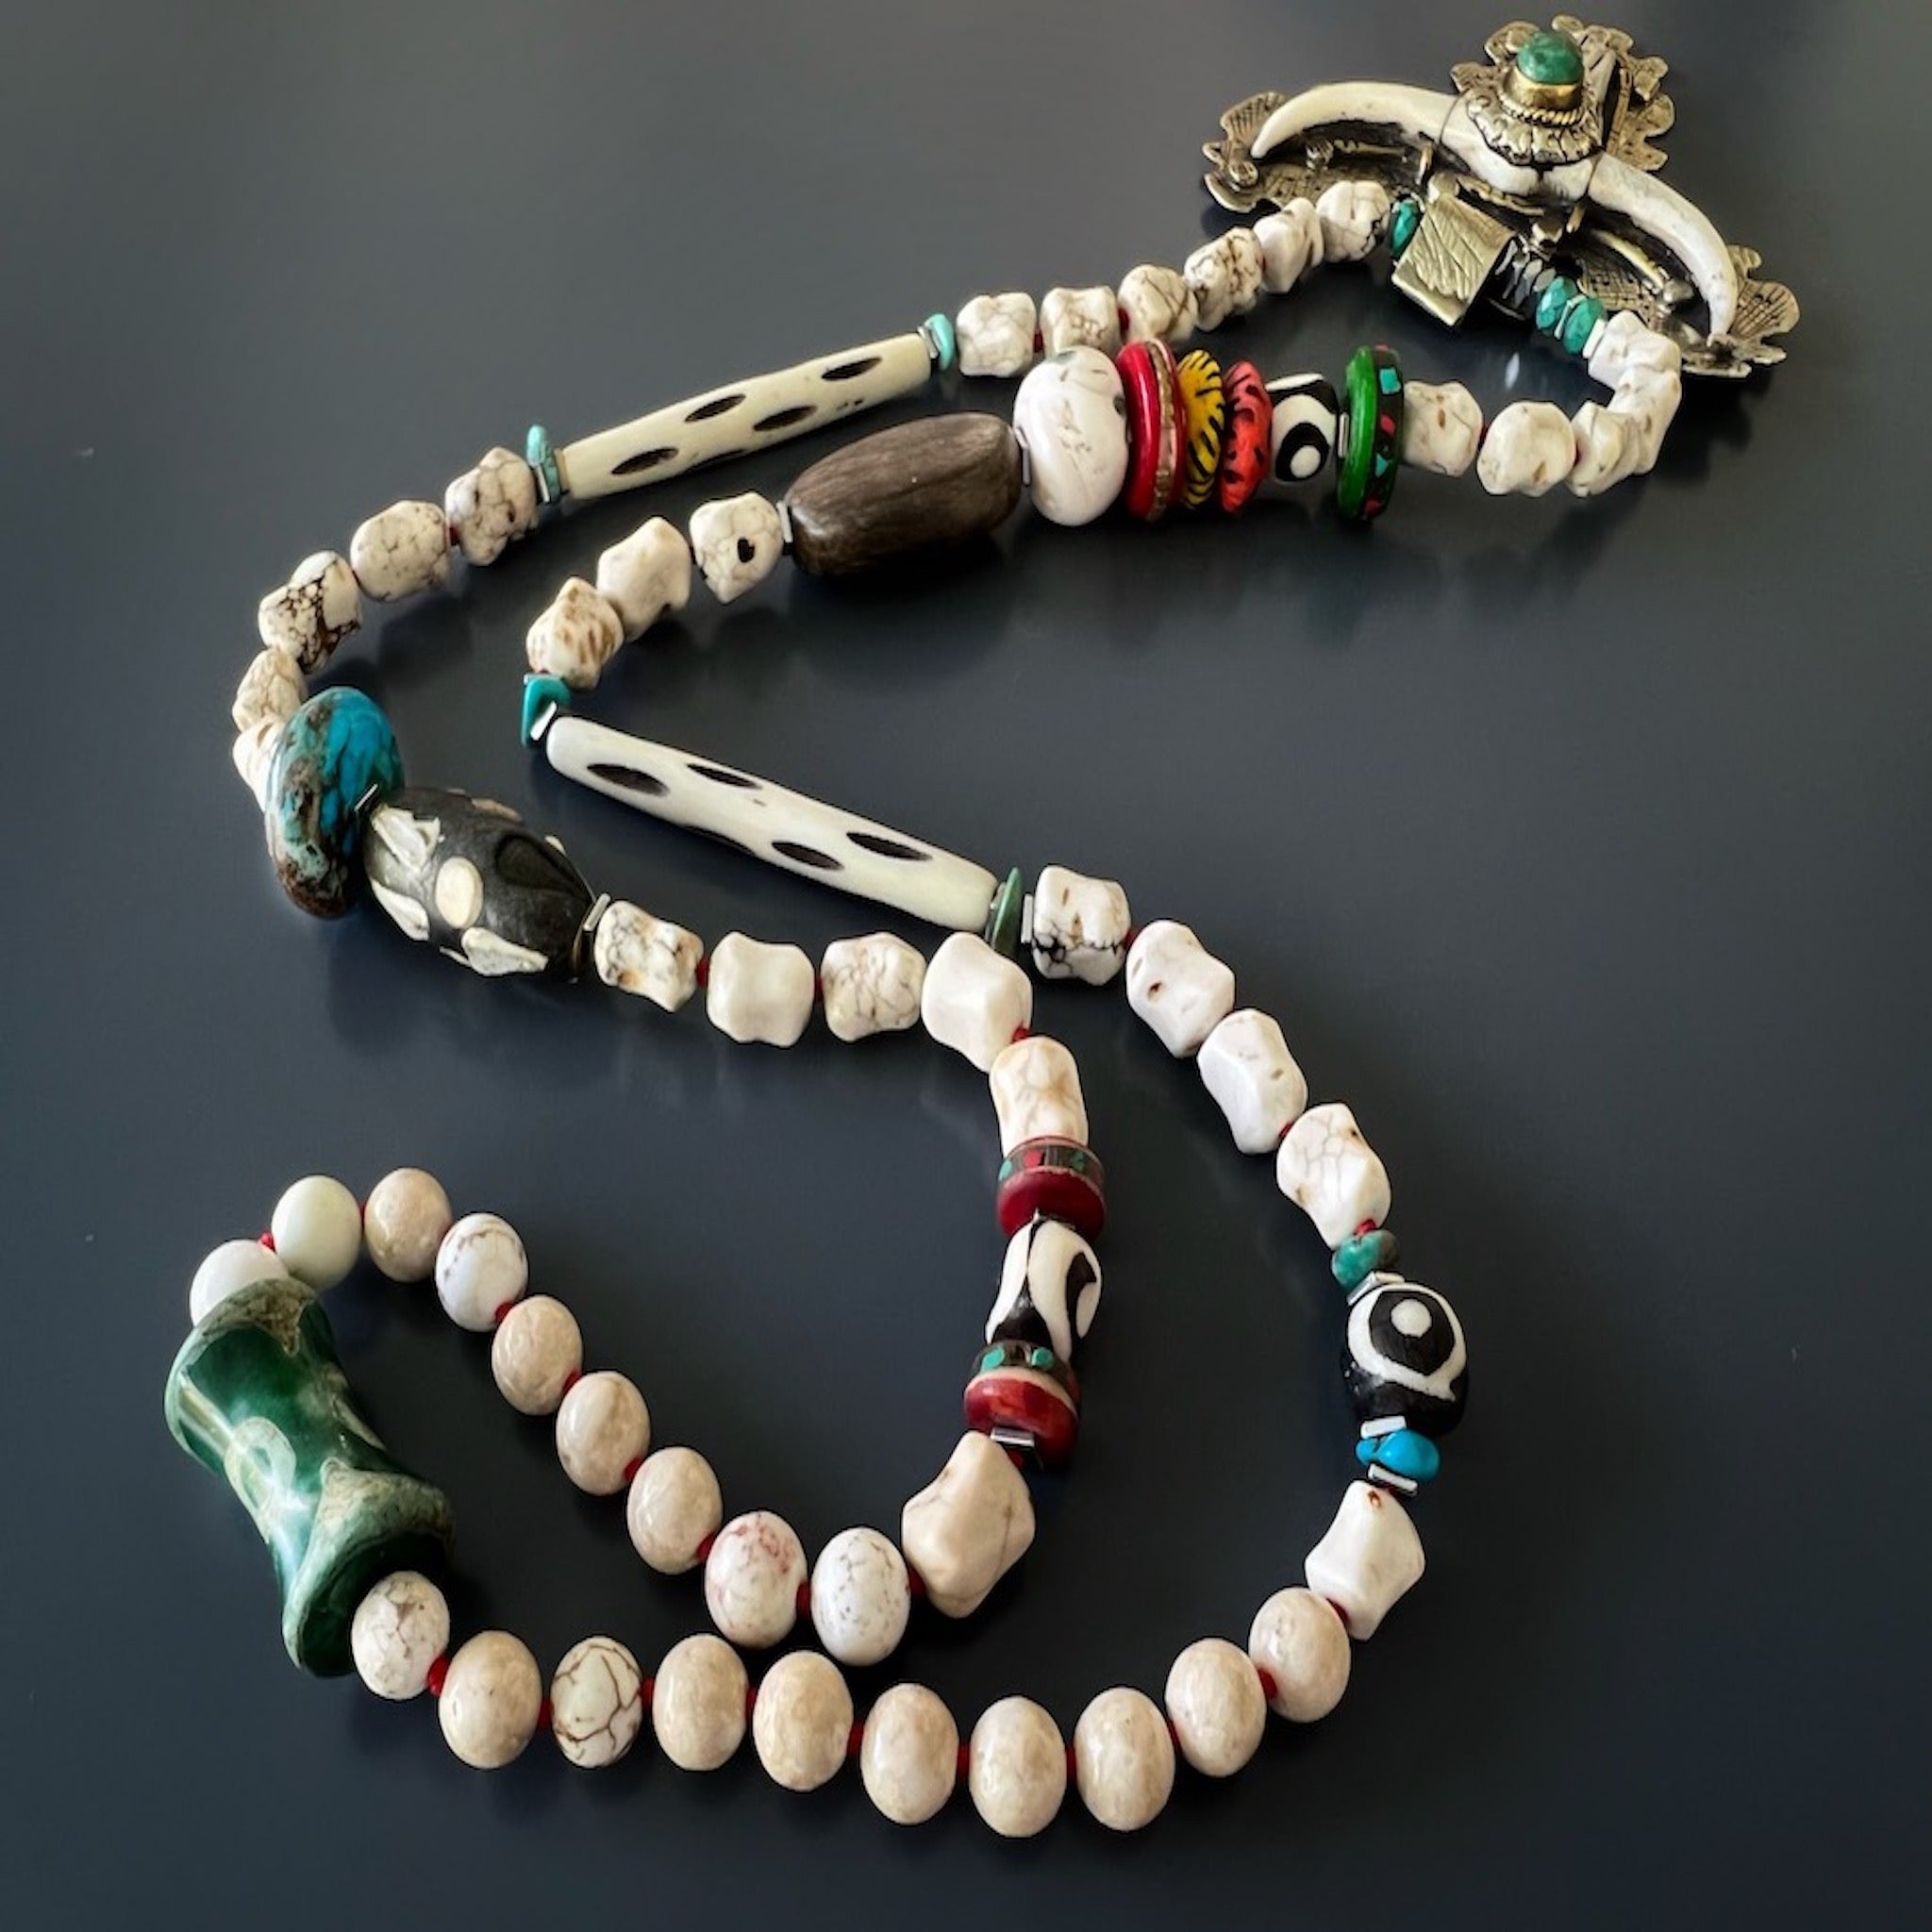 The necklace highlights the handmade carved longhorn pendant and the combination of white Tibetan, Agate, and natural turquoise beads, exuding a sense of spirituality and emotional balance.